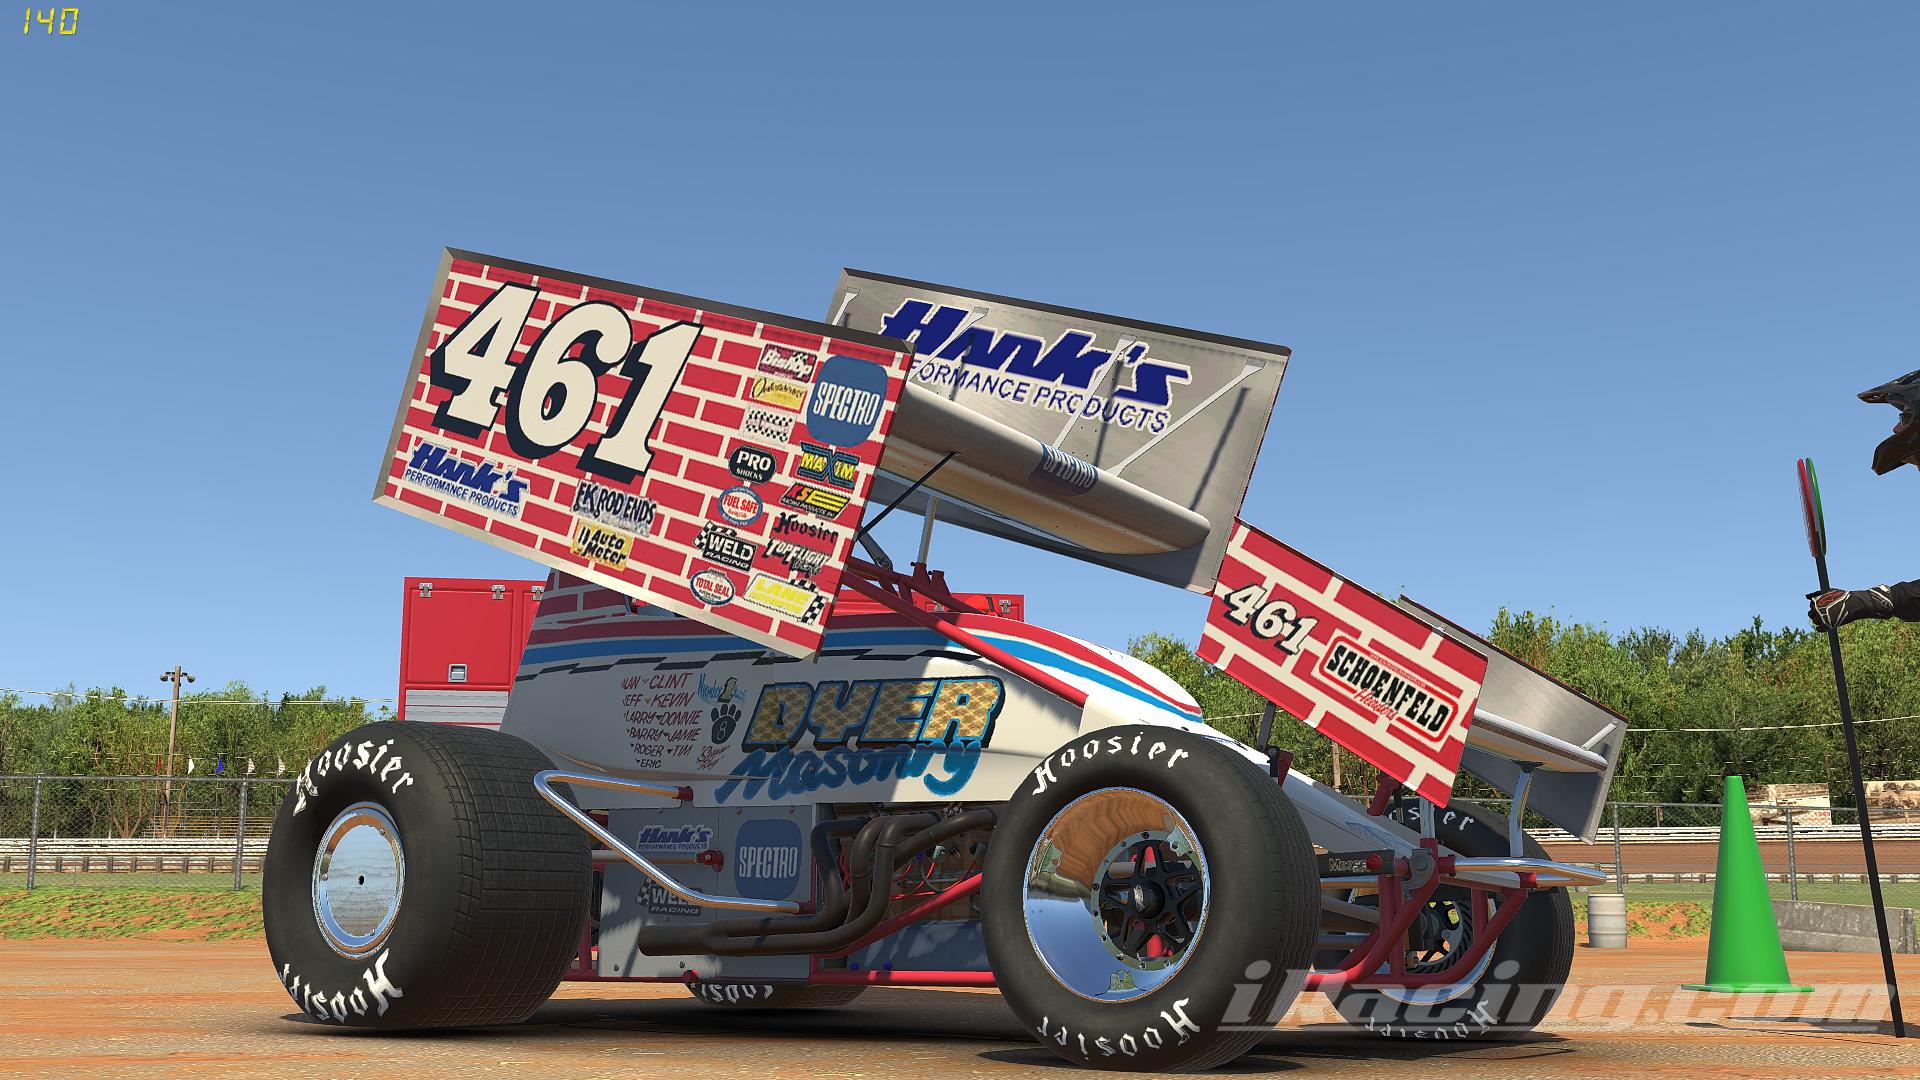 Preview of Lance Dewease/Walt Dyer 461 Brickmobile by Christopher Hockley